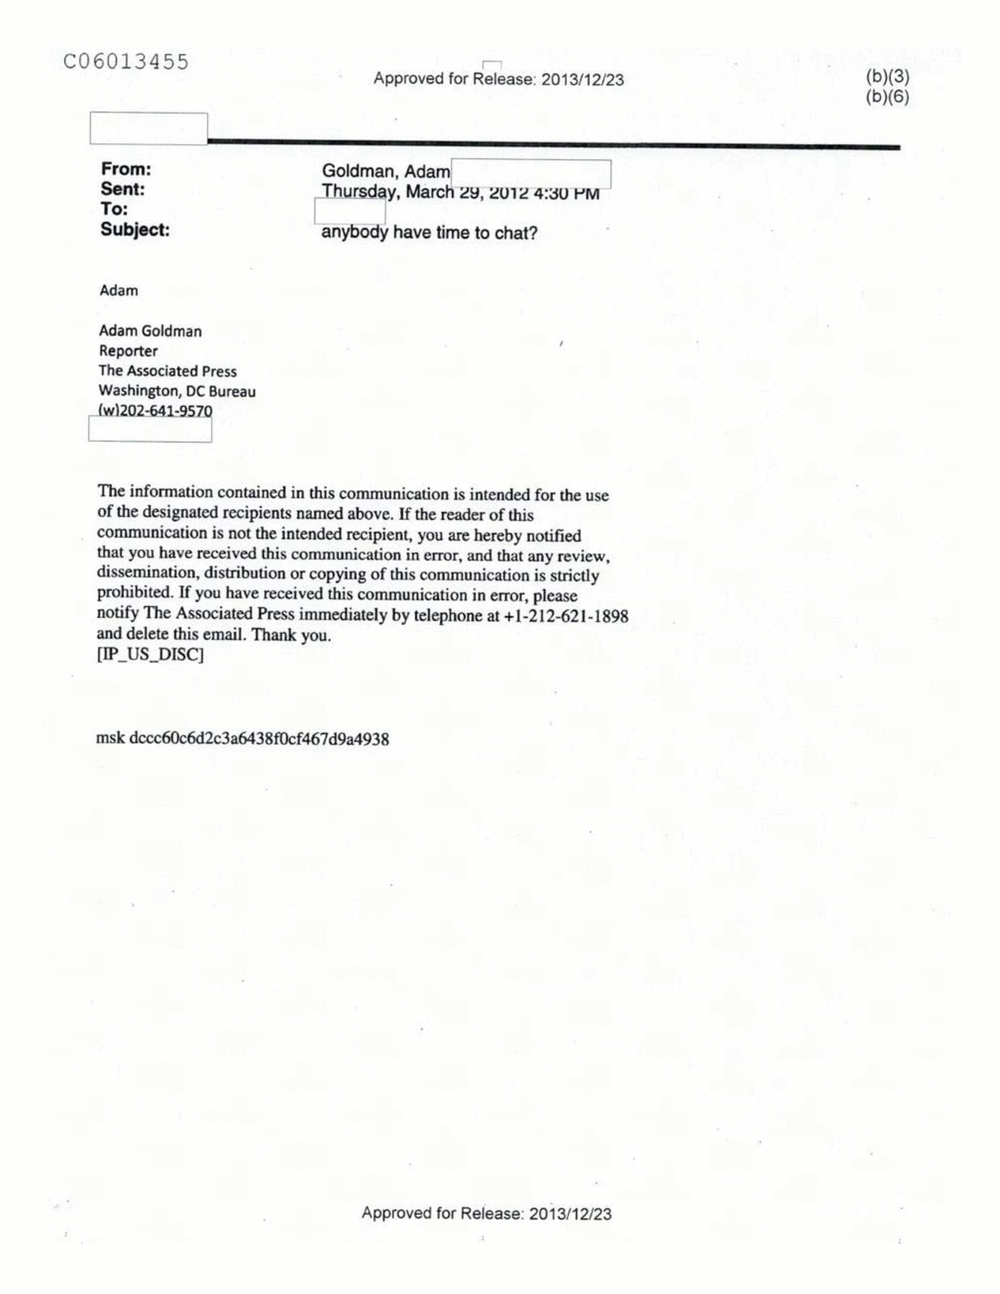 Page 322 from Email Correspondence Between Reporters and CIA Flacks